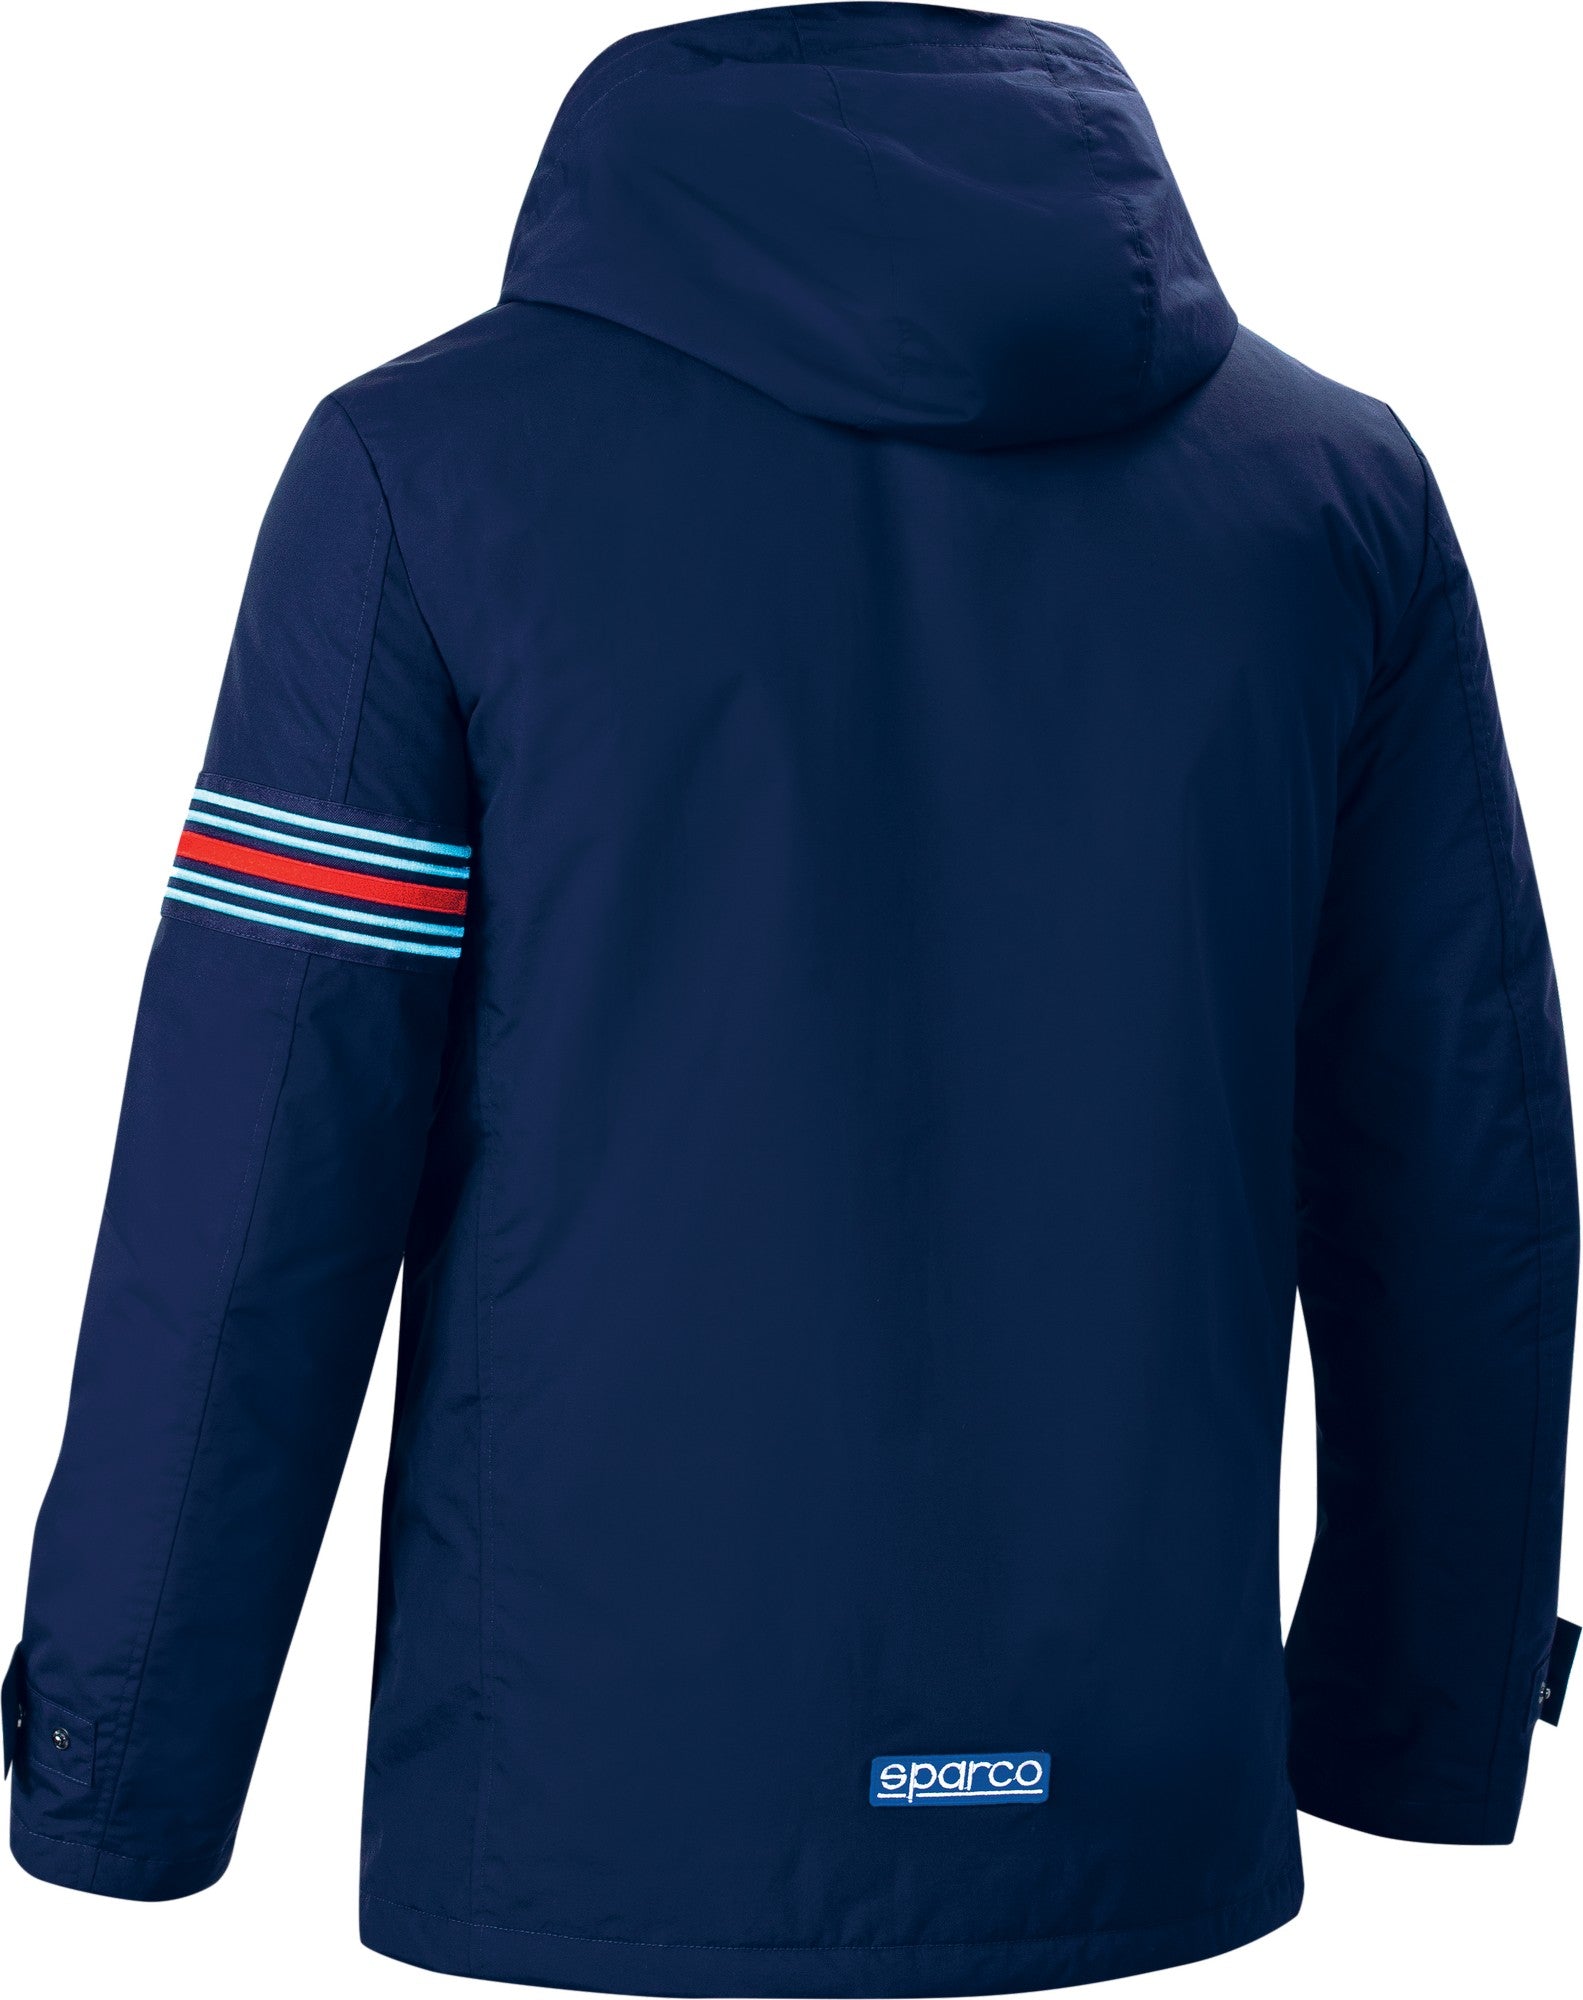 FIELD JACKET MARTINI-R - Sparco Shop